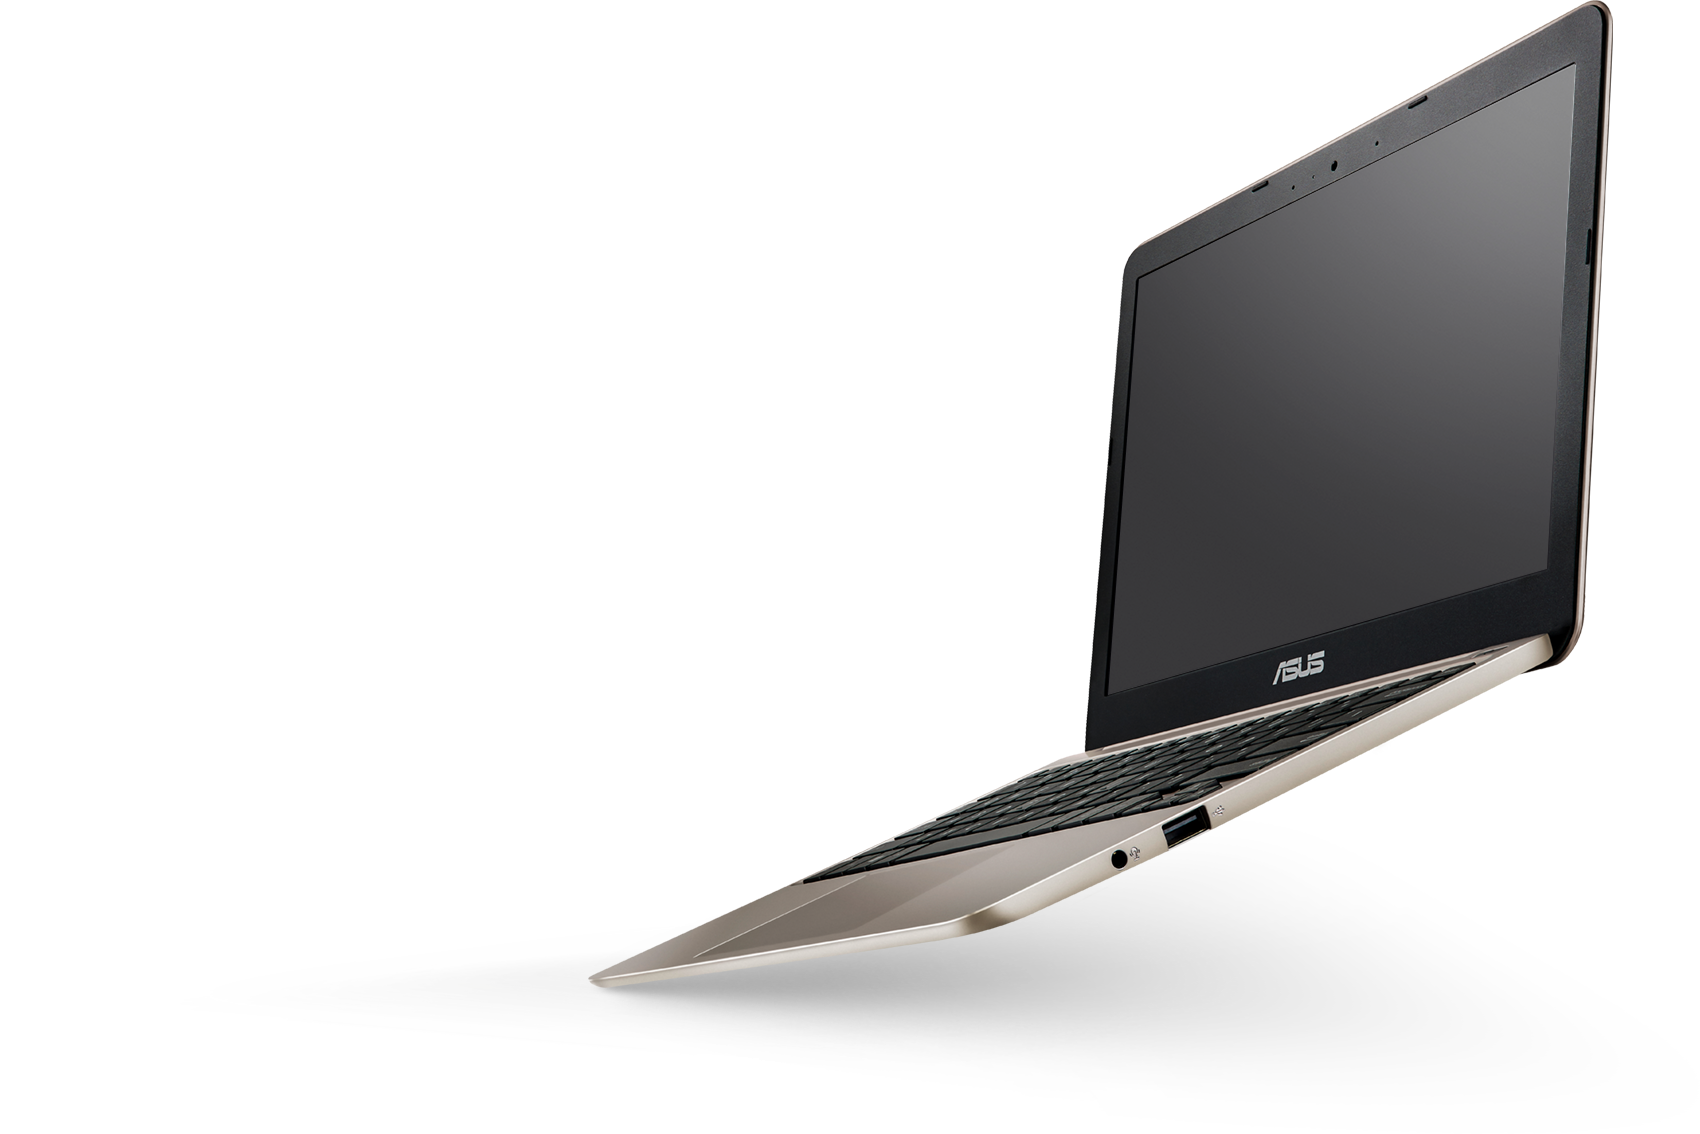 ASUS E200｜Laptops For Home｜ASUS Global